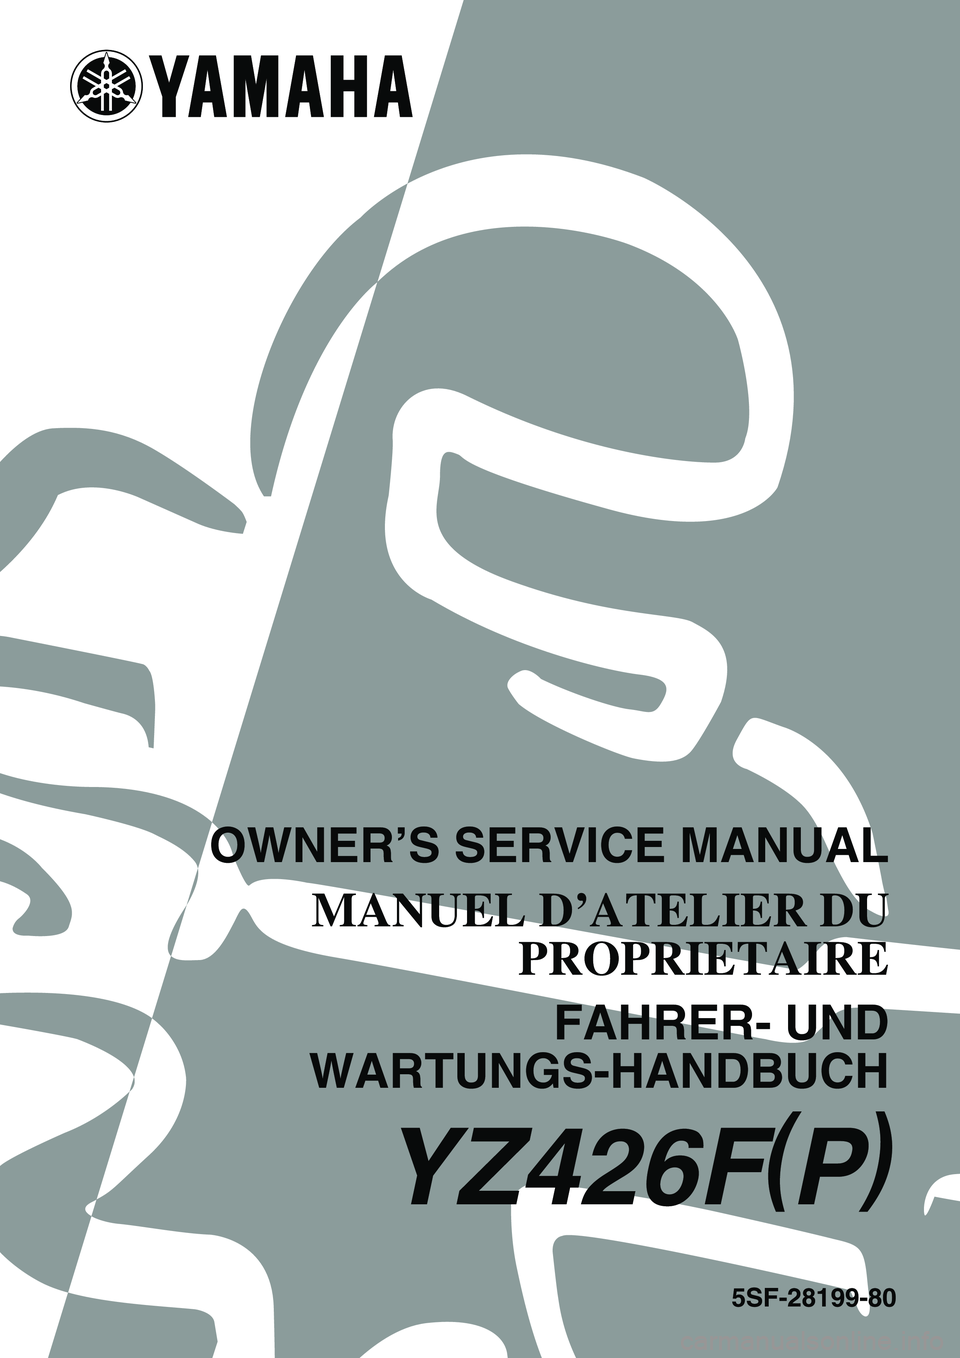 YAMAHA YZ426F 2002  Notices Demploi (in French) 5SF-28199-80
YZ426F(P)
OWNER’S SERVICE MANUAL
MANUEL D’ATELIER DU
PROPRIETAIRE
FAHRER- UND
WARTUNGS-HANDBUCH 